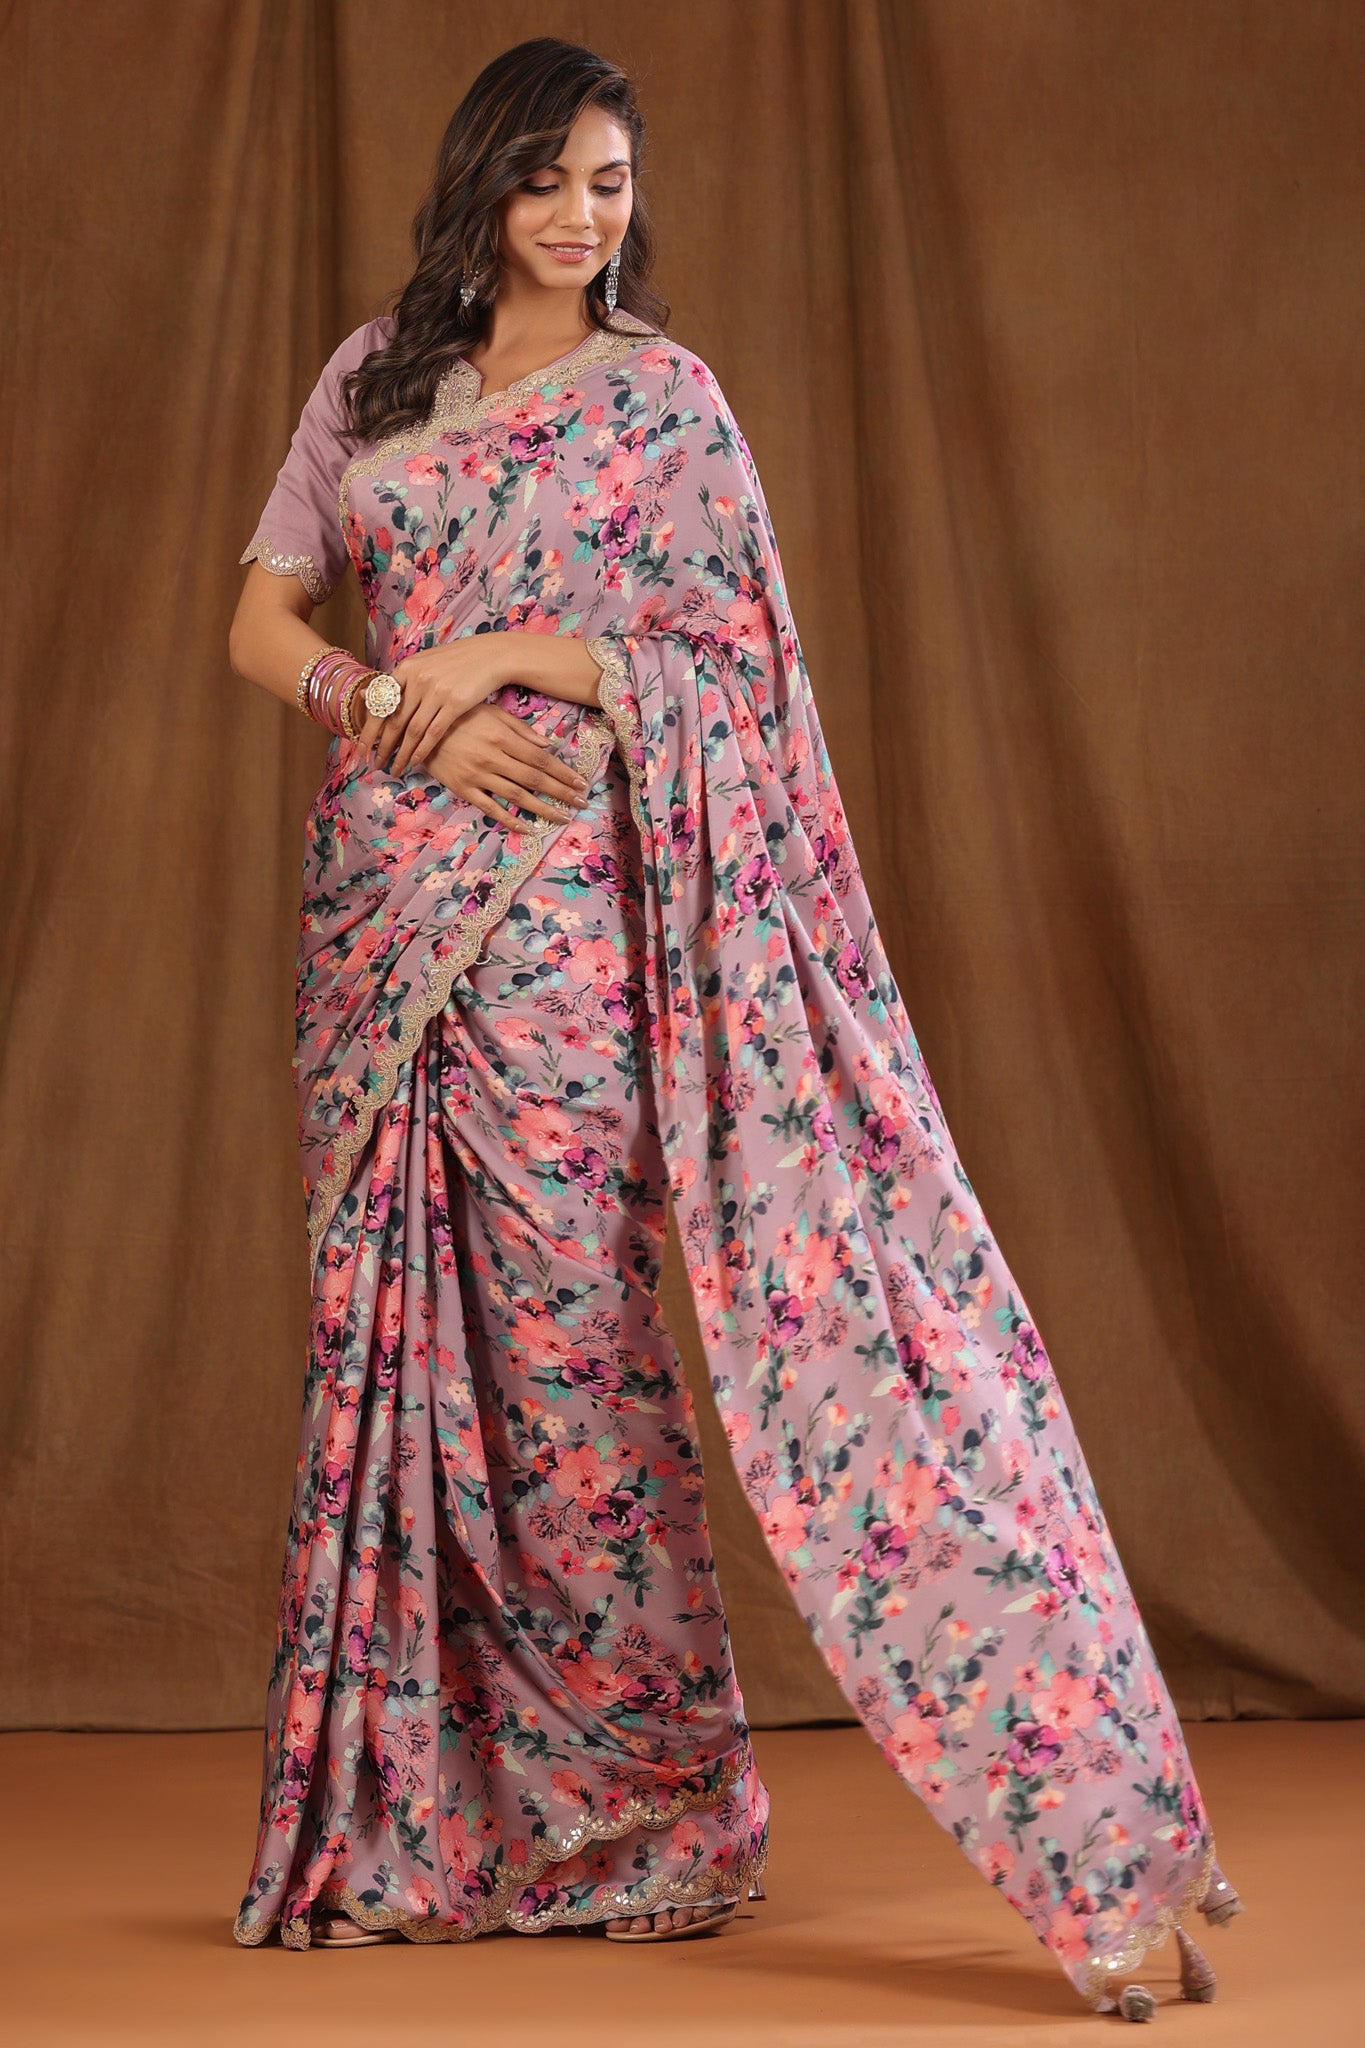 Buy beautiful onion pink floral crepe sari online in USA with scalloped border. Make a fashion statement at weddings with stunning designer sarees, embroidered sarees with blouse, wedding sarees, handloom sarees from Pure Elegance Indian fashion store in USA.-pallu